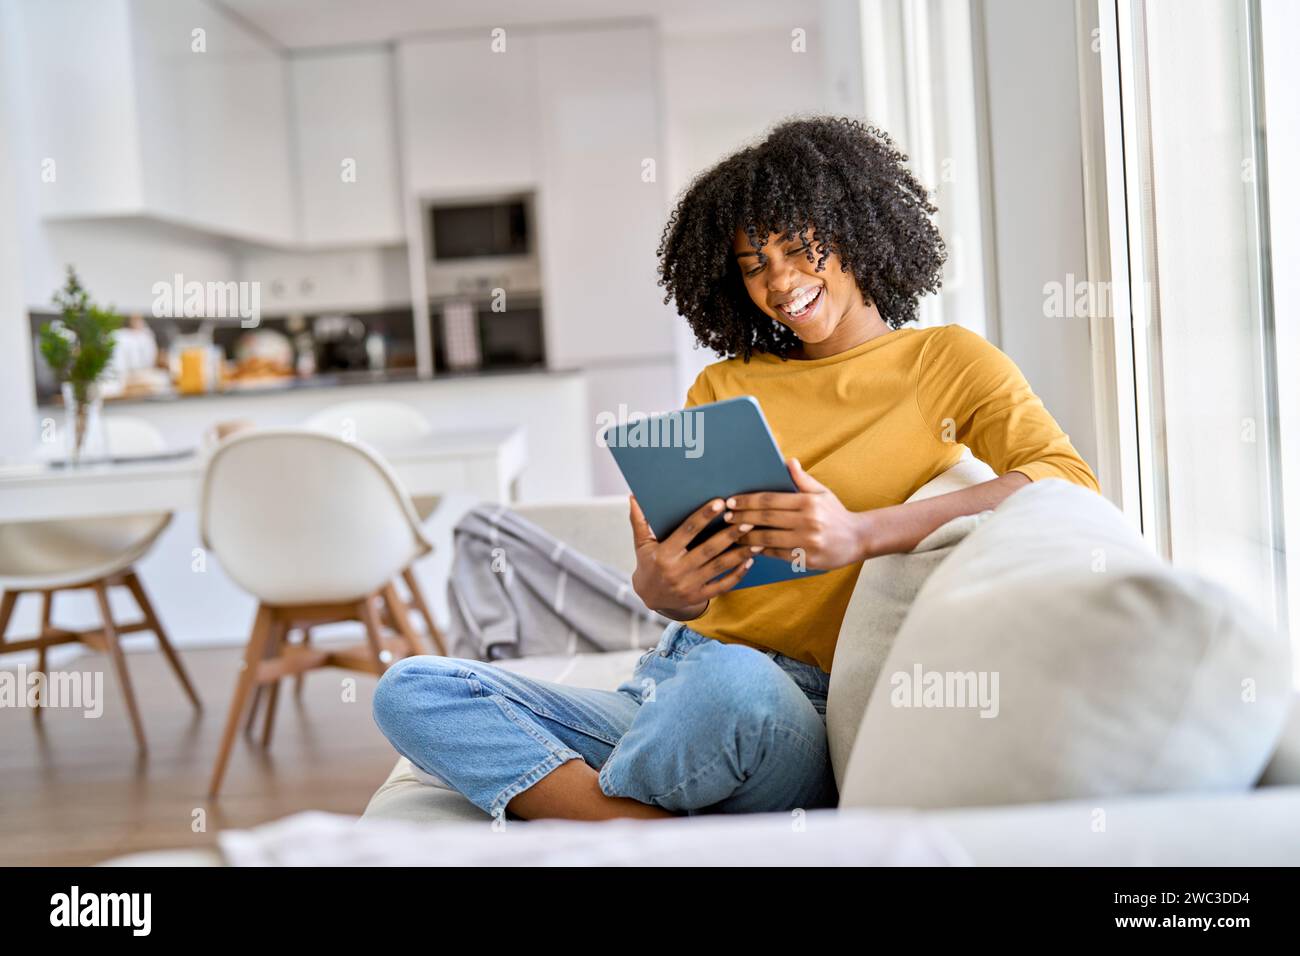 Happy young African woman using digital tablet laughing on sofa at home. Stock Photo